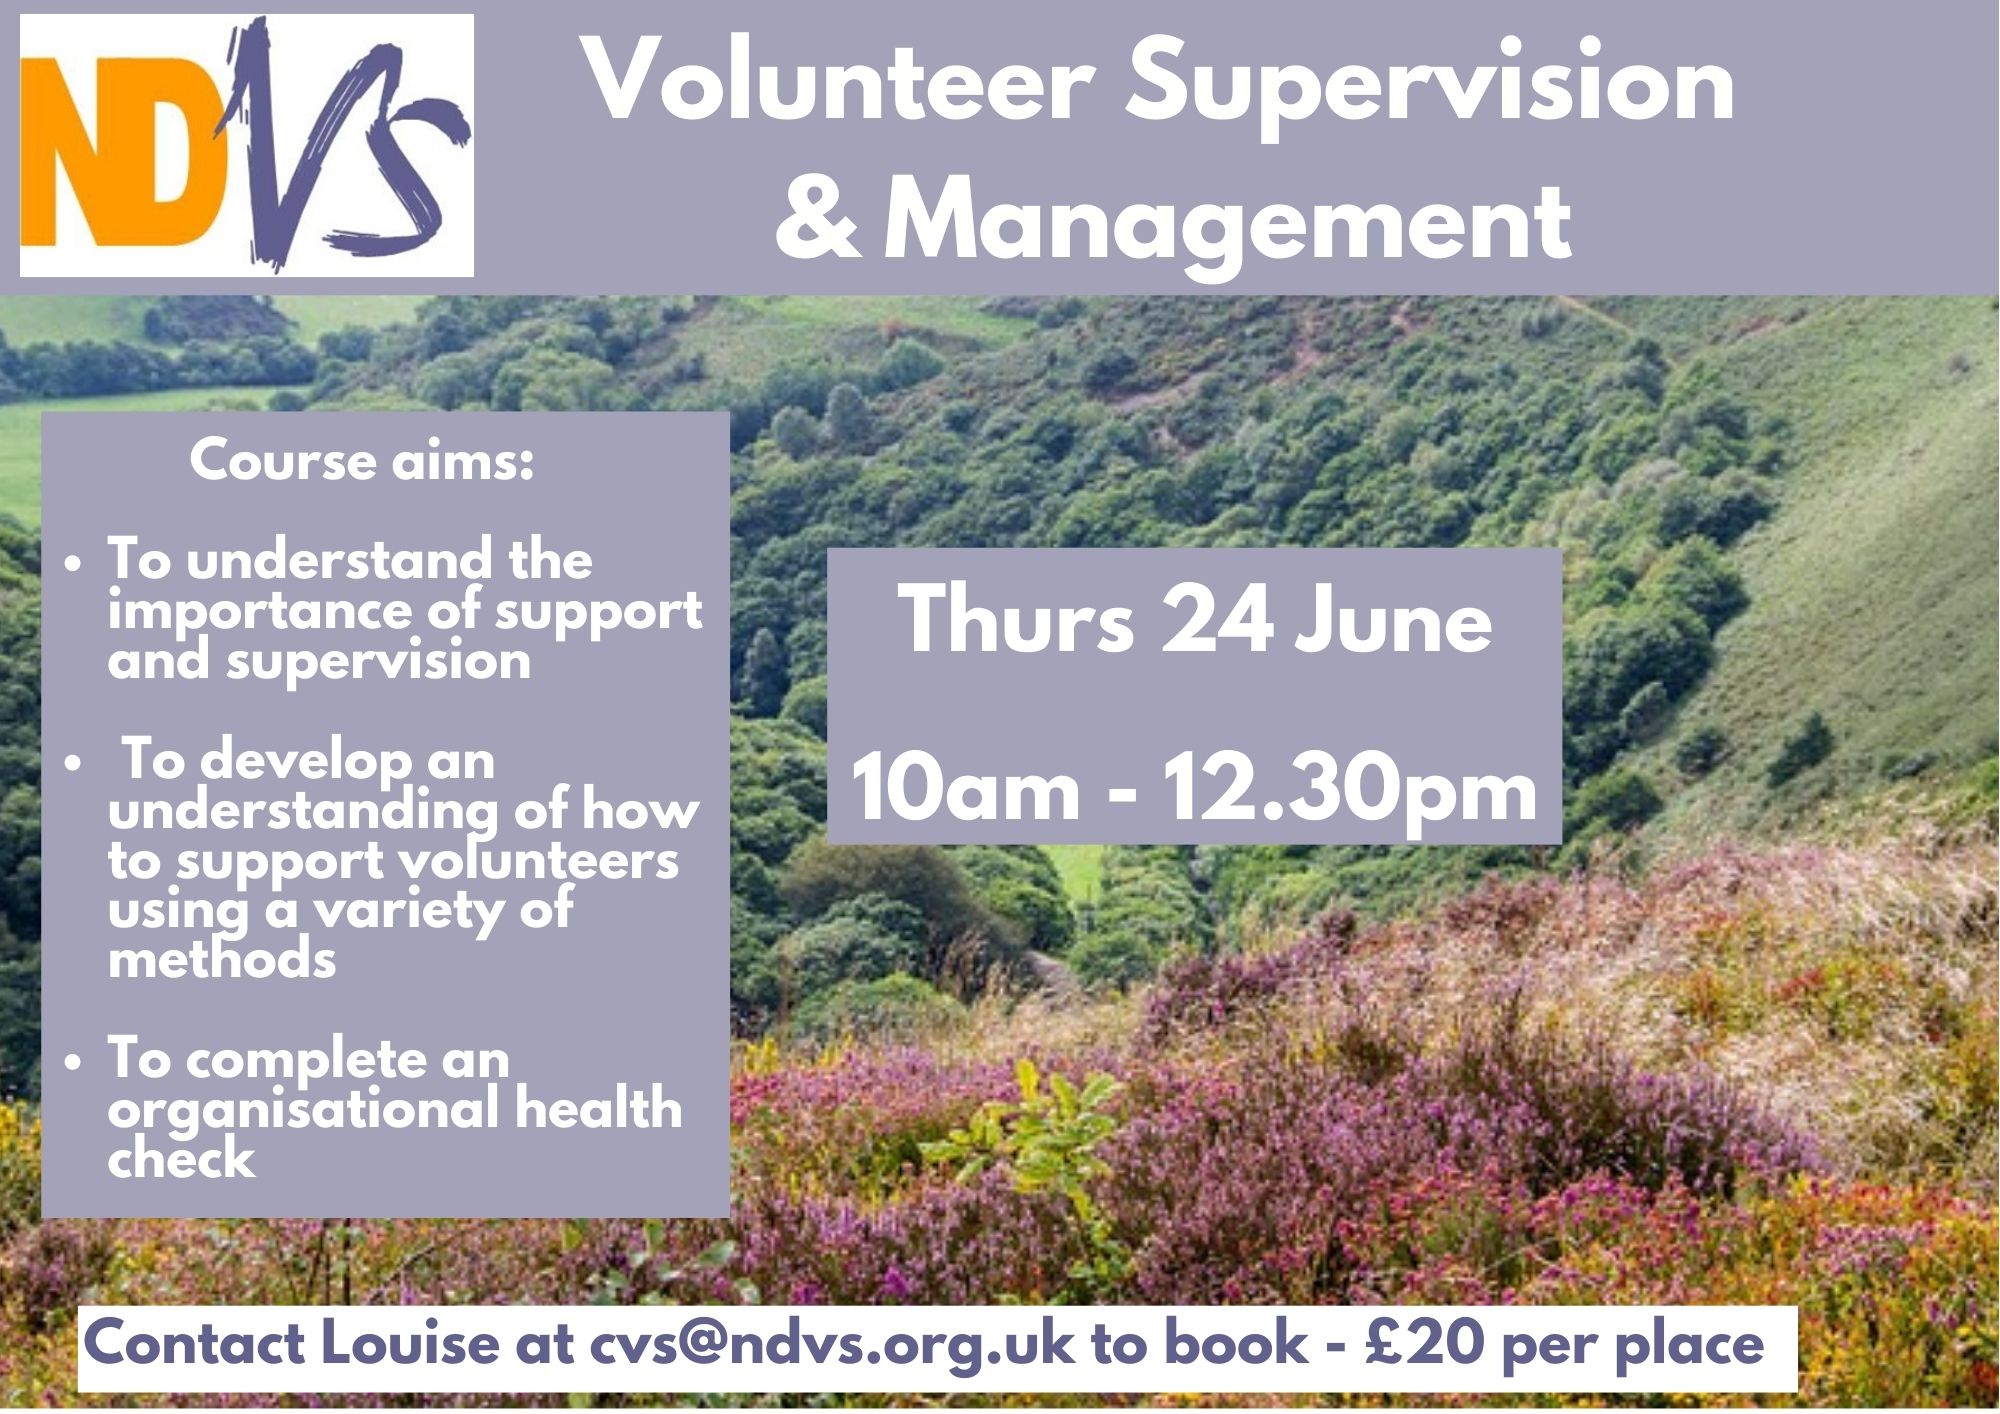 Training - Vol Supervision flyer May 21pg